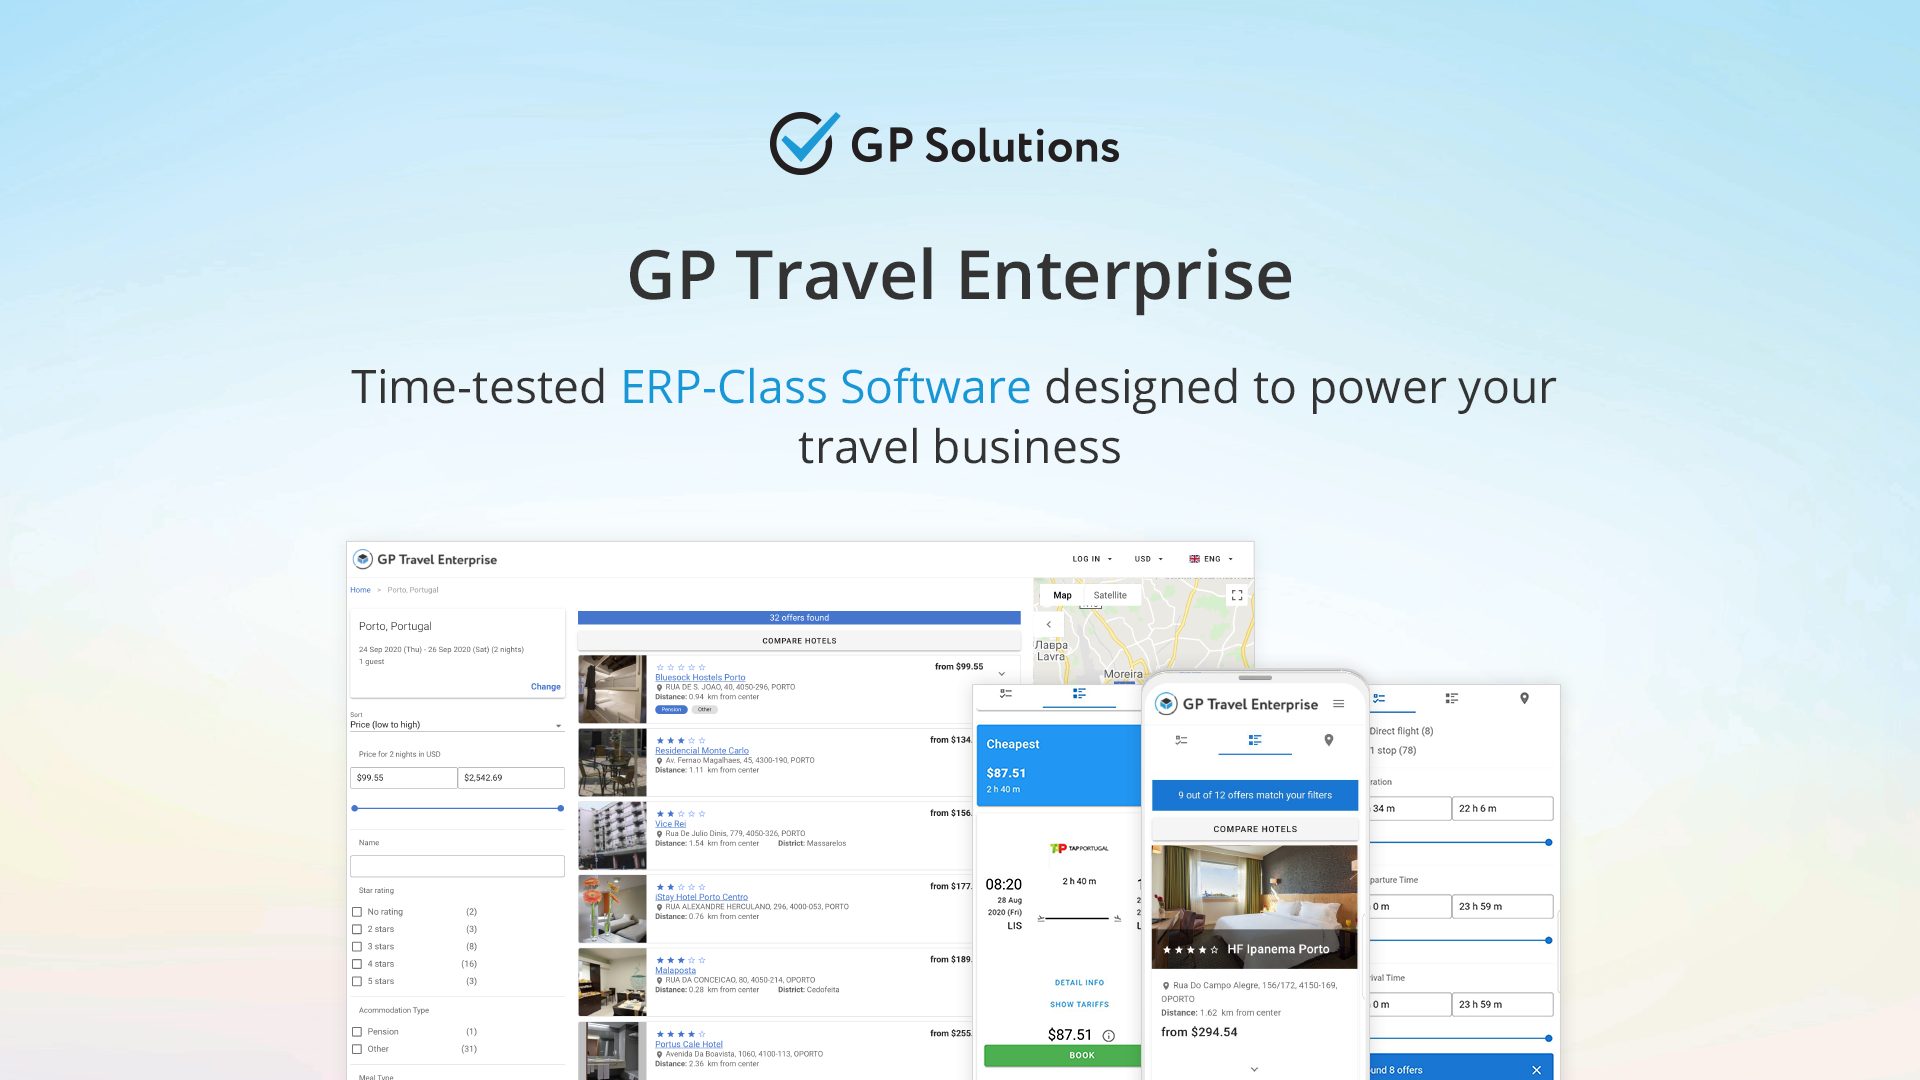 GP Travel Enterprise is an innovative and powerful travel automation solution for Tour Operators, OTAs, DMCs, TMCs and Wholesalers, which helps hundreds of companies across the globe to run and grow their businesses.